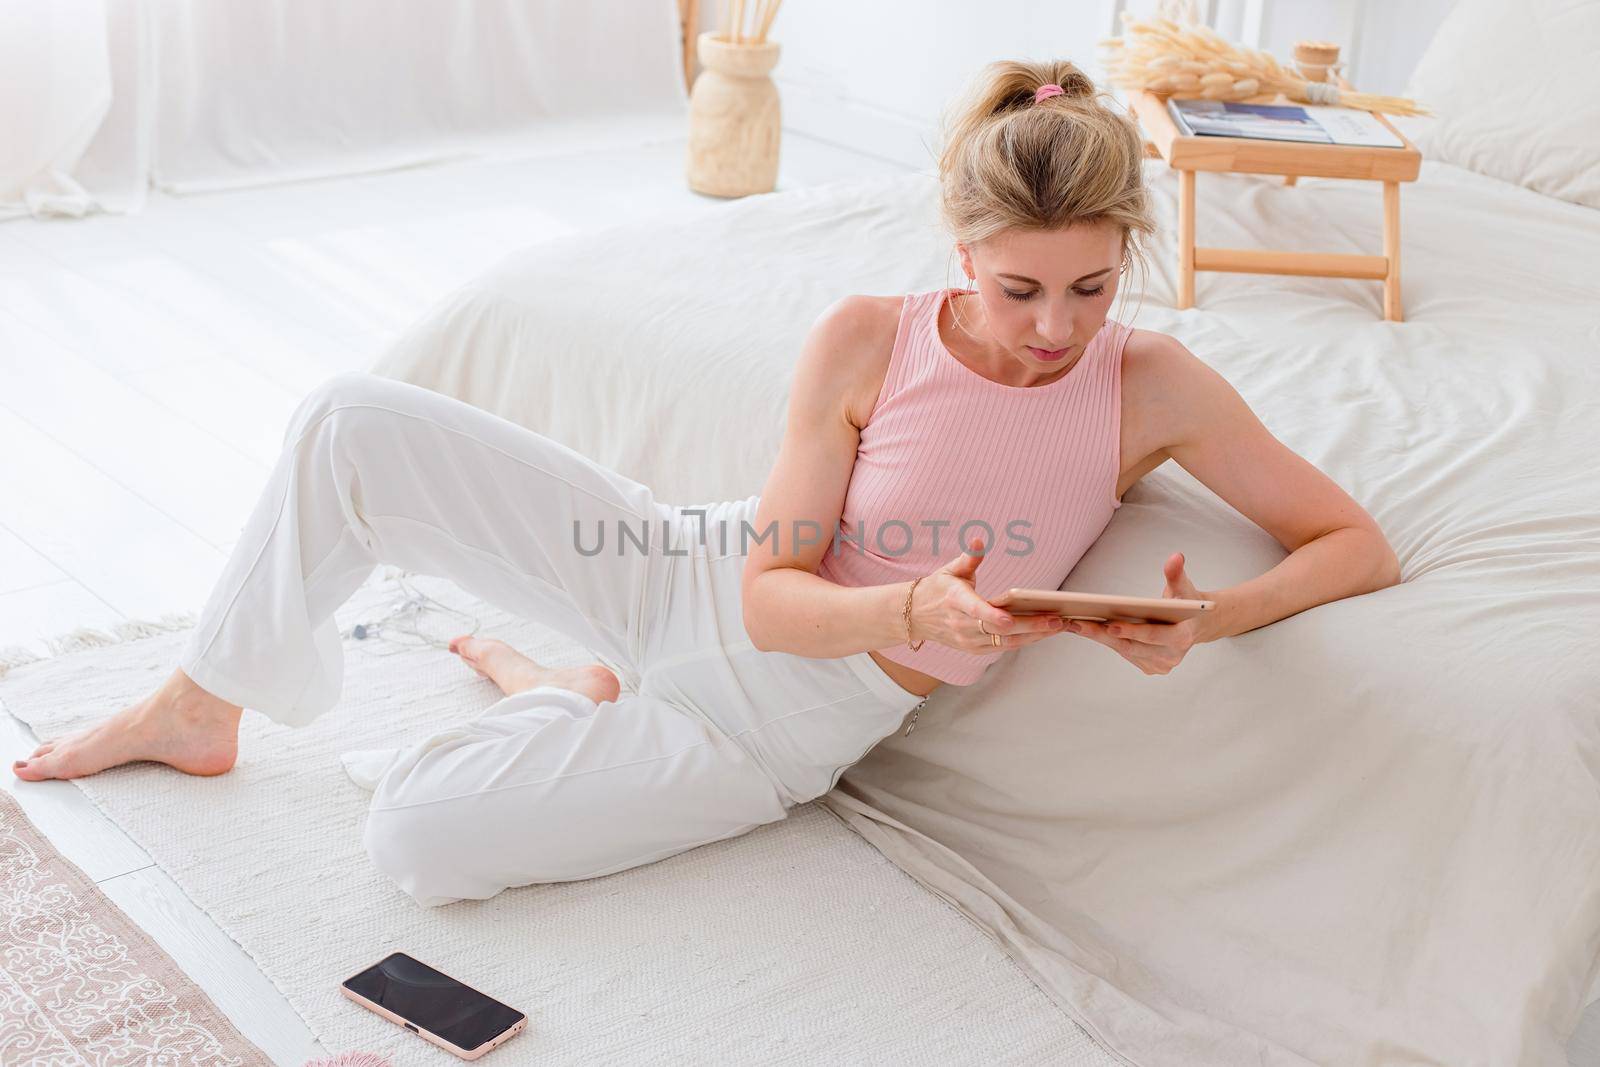 A beautiful slender woman with blond hair, a pink top and white pants, sits on the floor in the morning, near a white bed, hold a digital tablet, a smartphone lies nearby